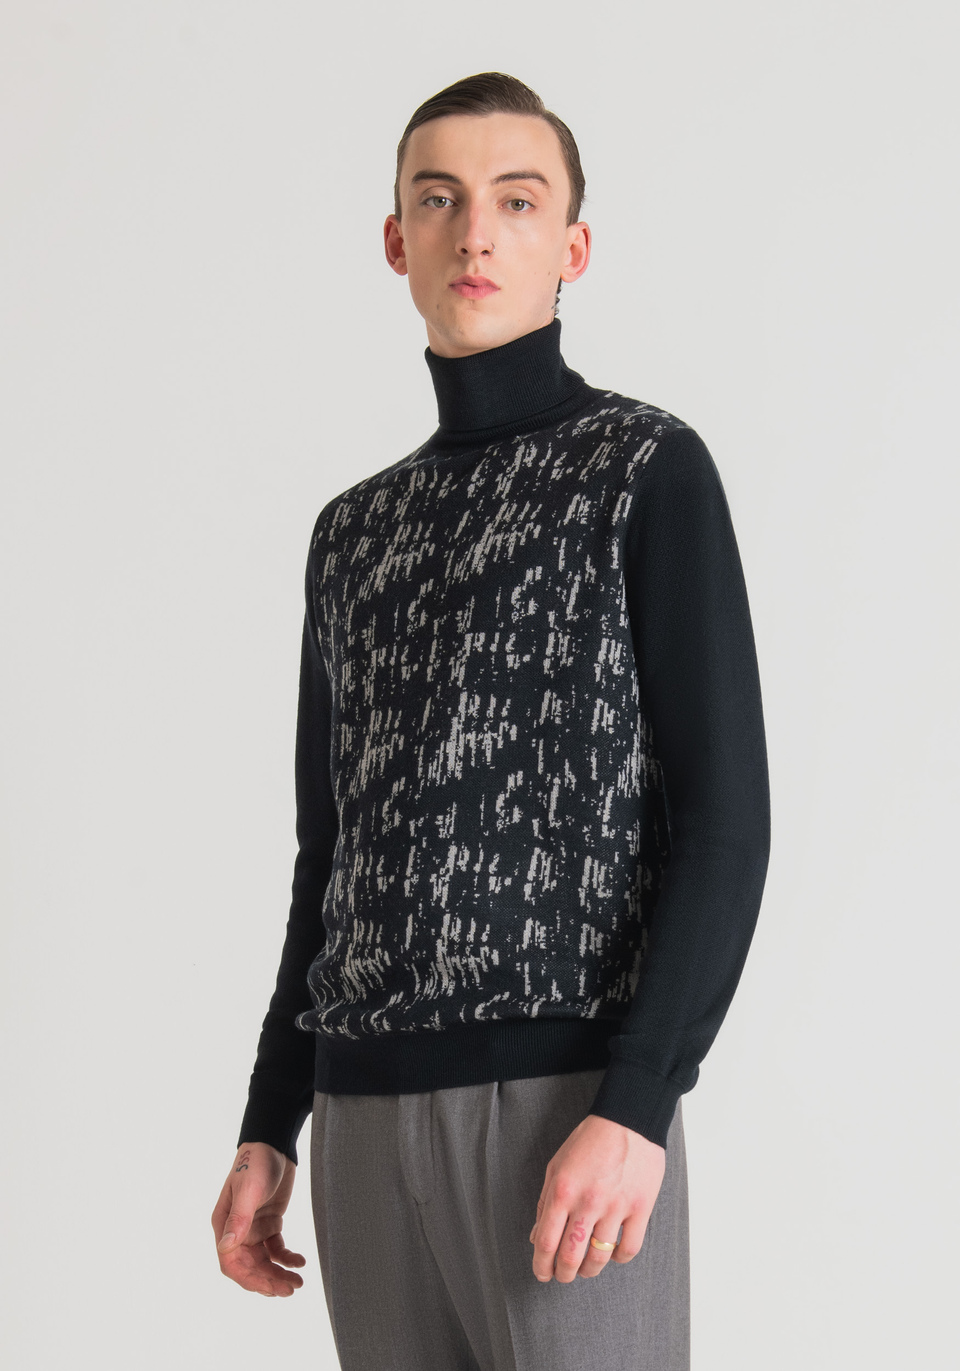 REGULAR FIT SWEATER IN WOOL BLEND YARN WITH ABSTRACT JACQUARD PATTERN - Antony Morato Online Shop